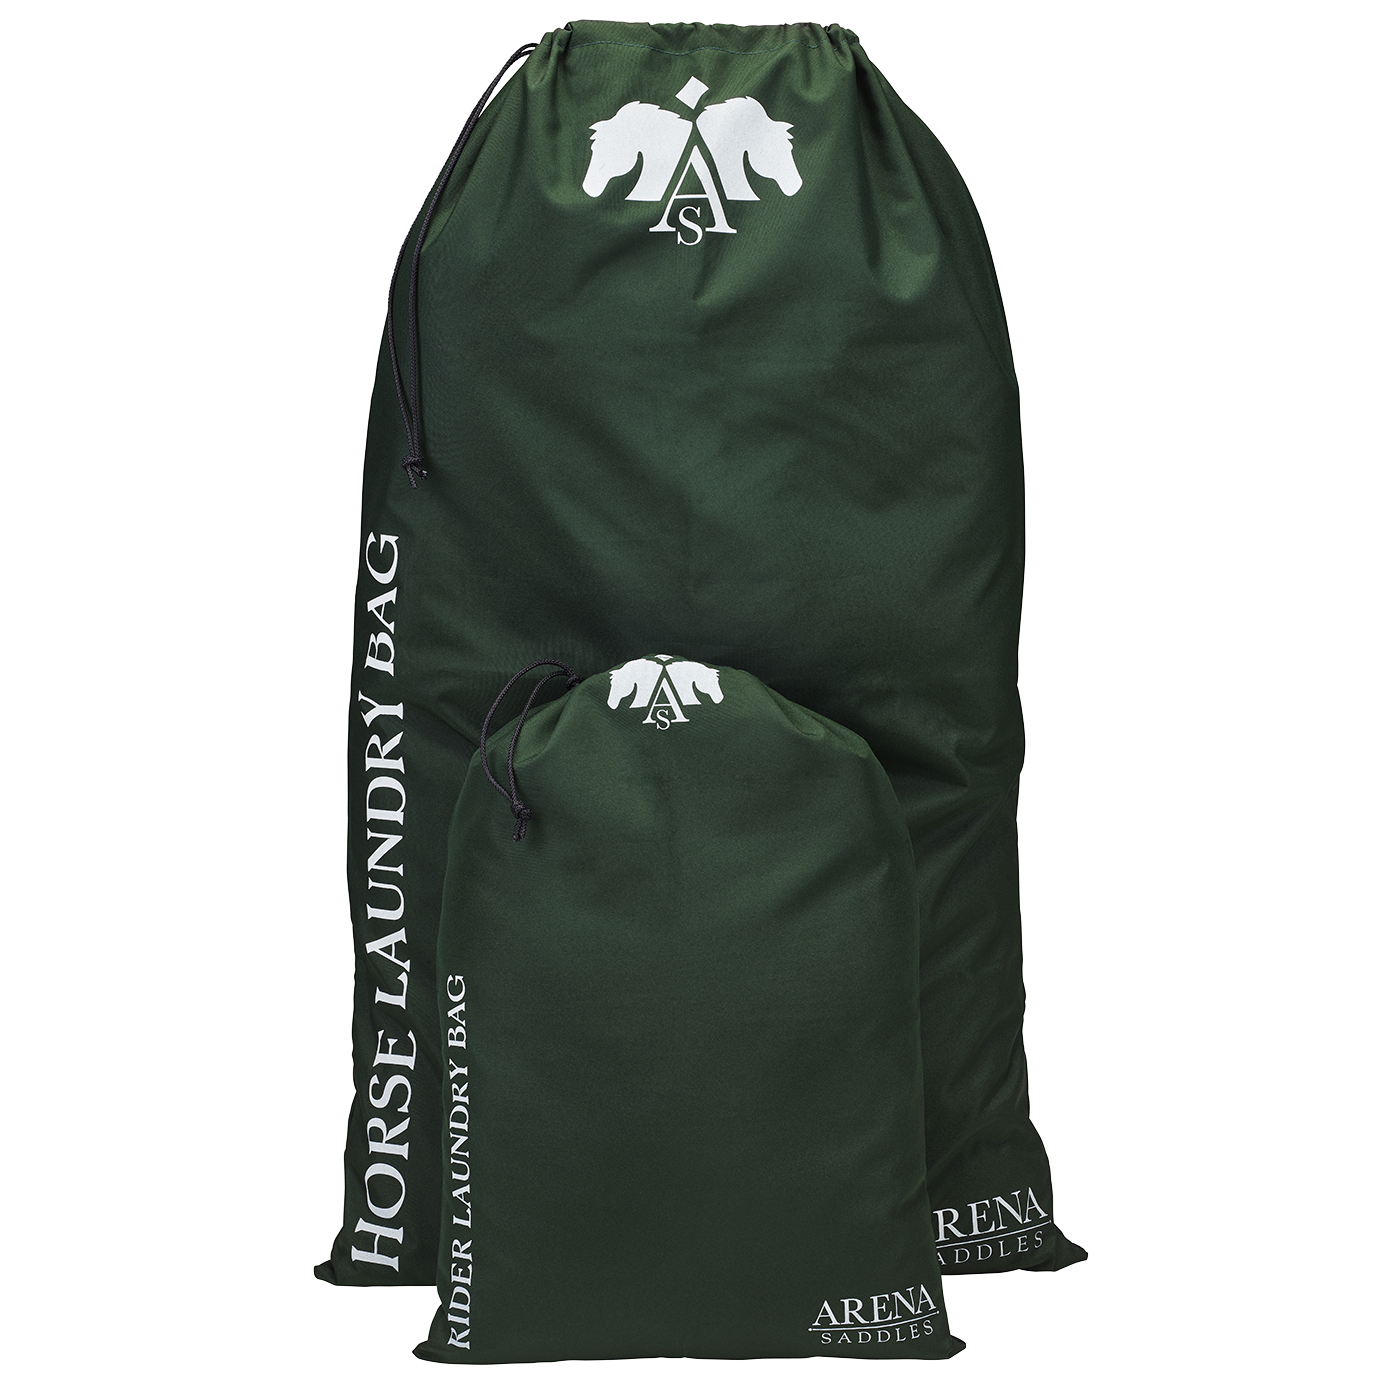 Arena Laundry Bags - 718:42044811673799